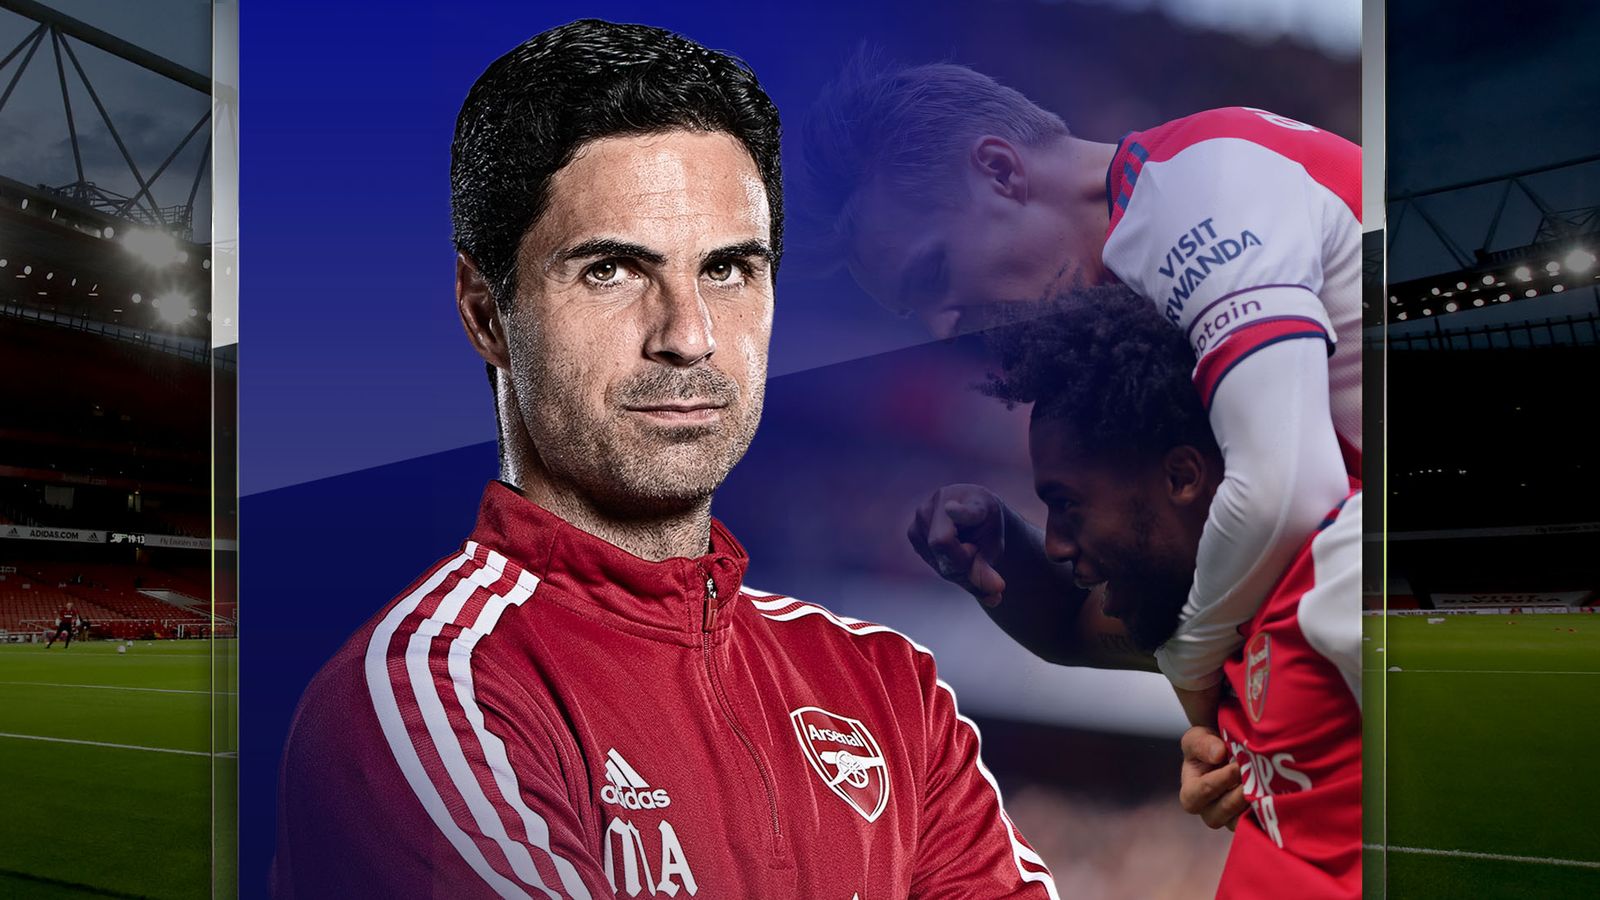 Cardiff City v Arsenal: Four things we noticed, Feature